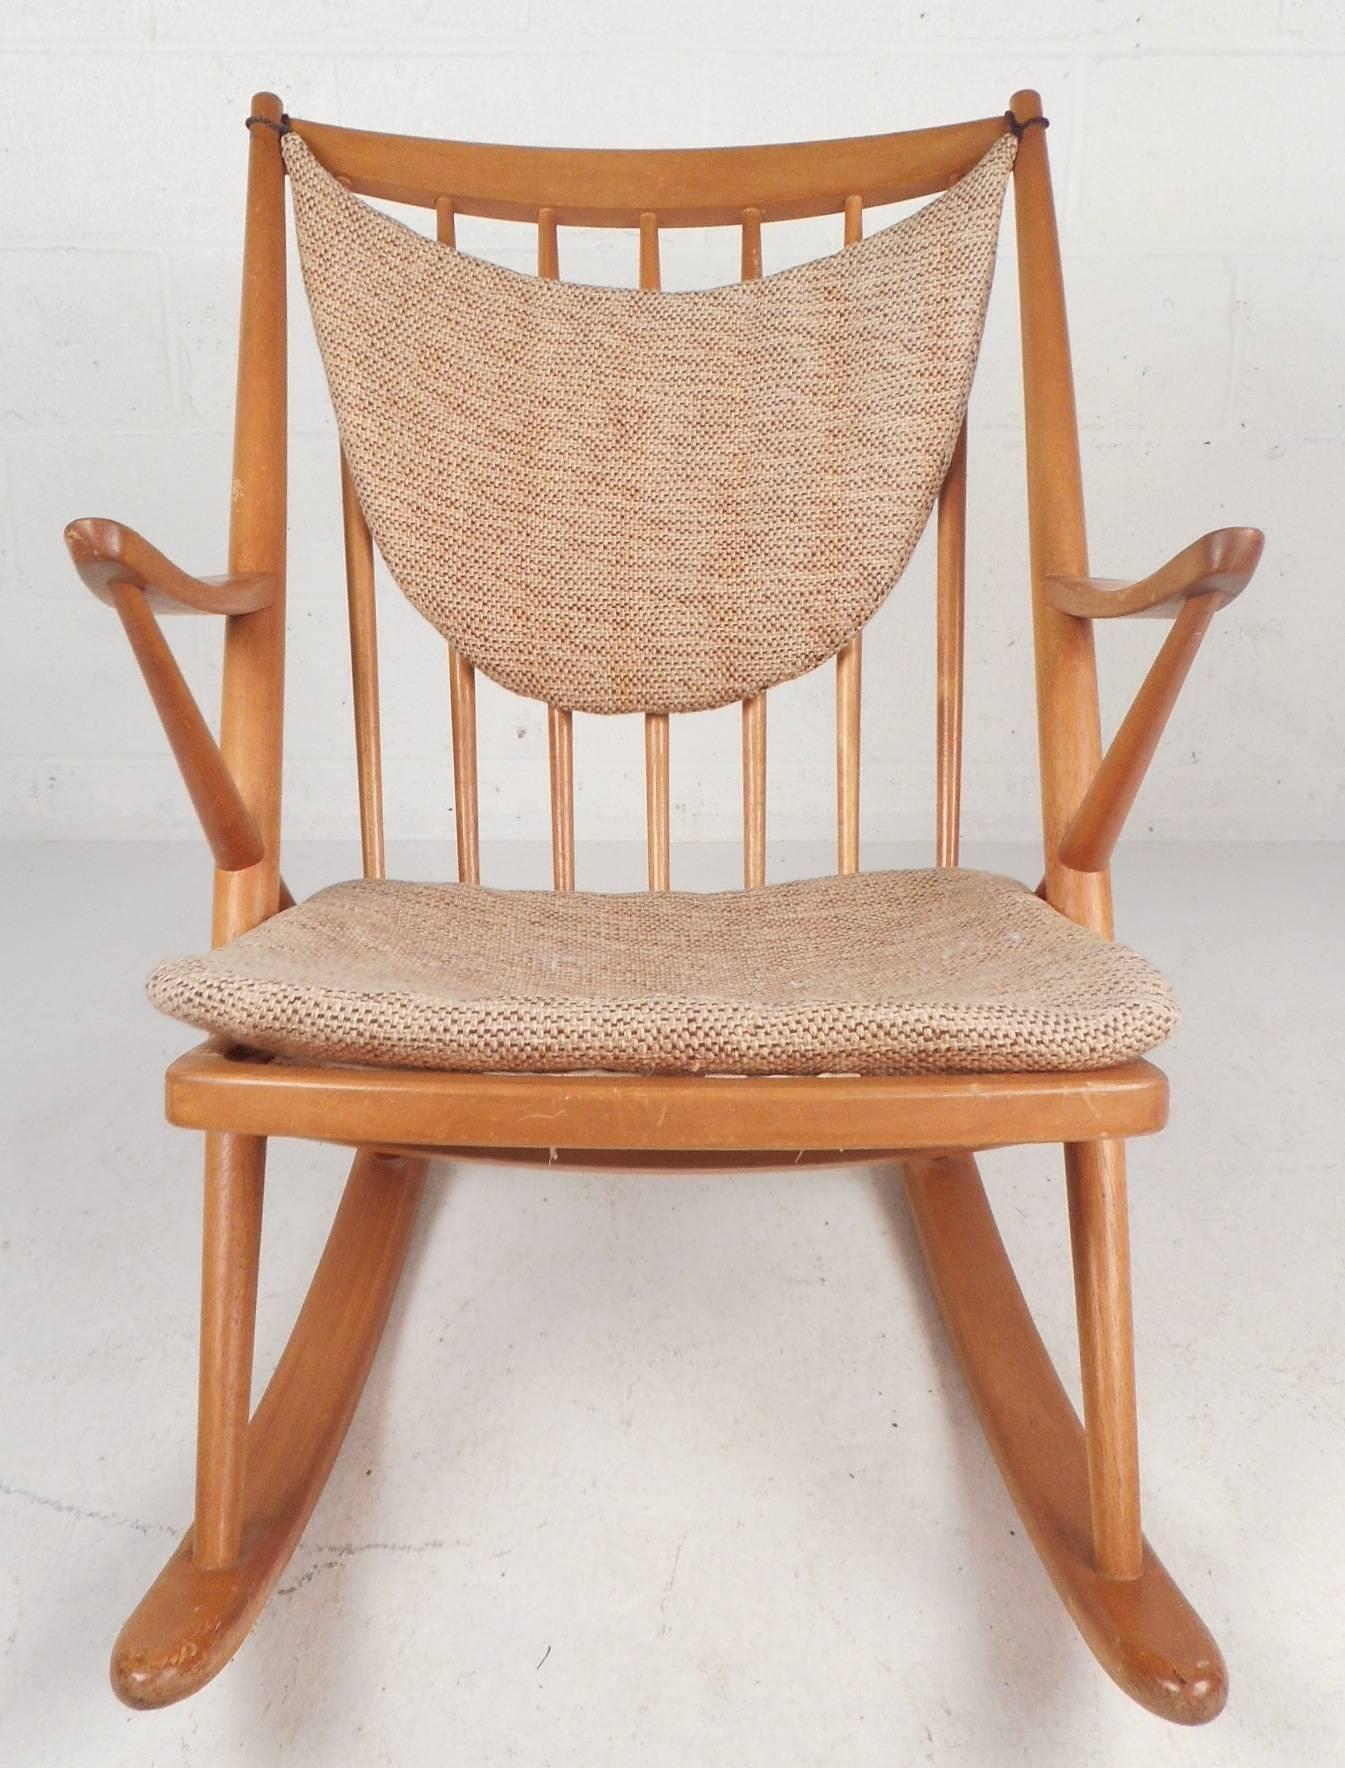 This beautiful vintage modern rocking chair features an unusual 